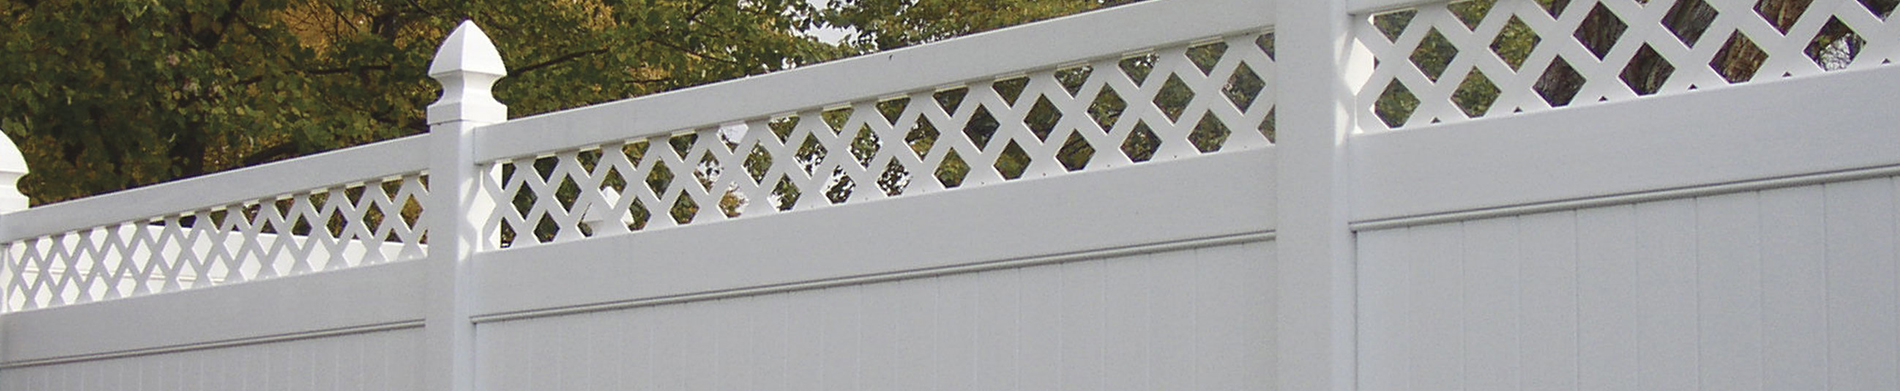 Things You Should Know When Sharing A Fence With Your Neighbor